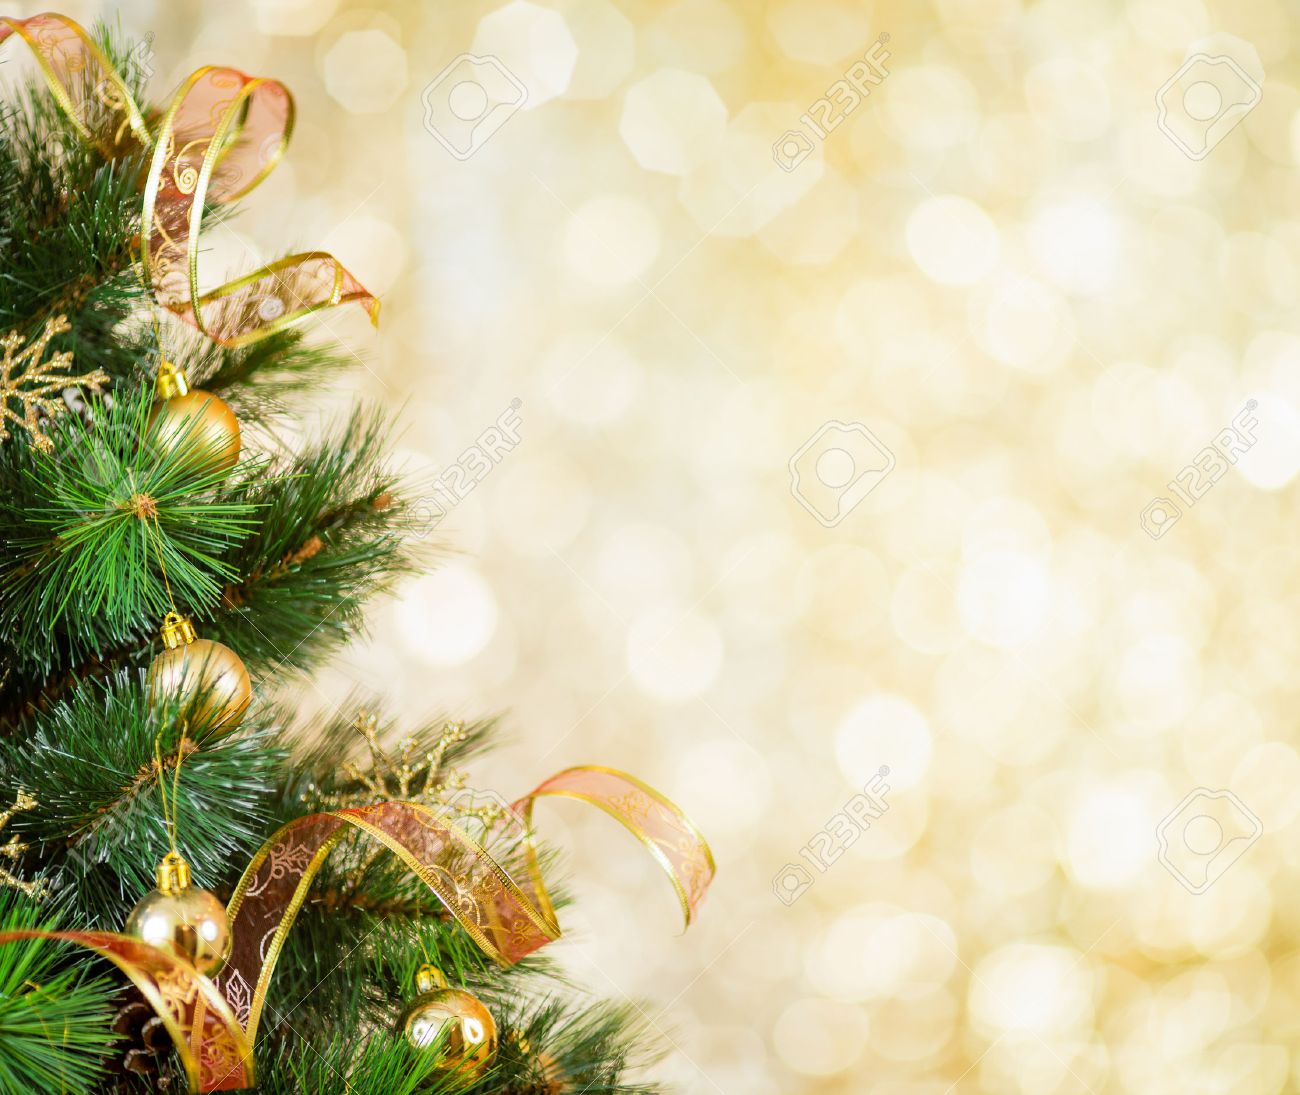 Golden Christmas Tree Background Stock Photo Picture And Royalty